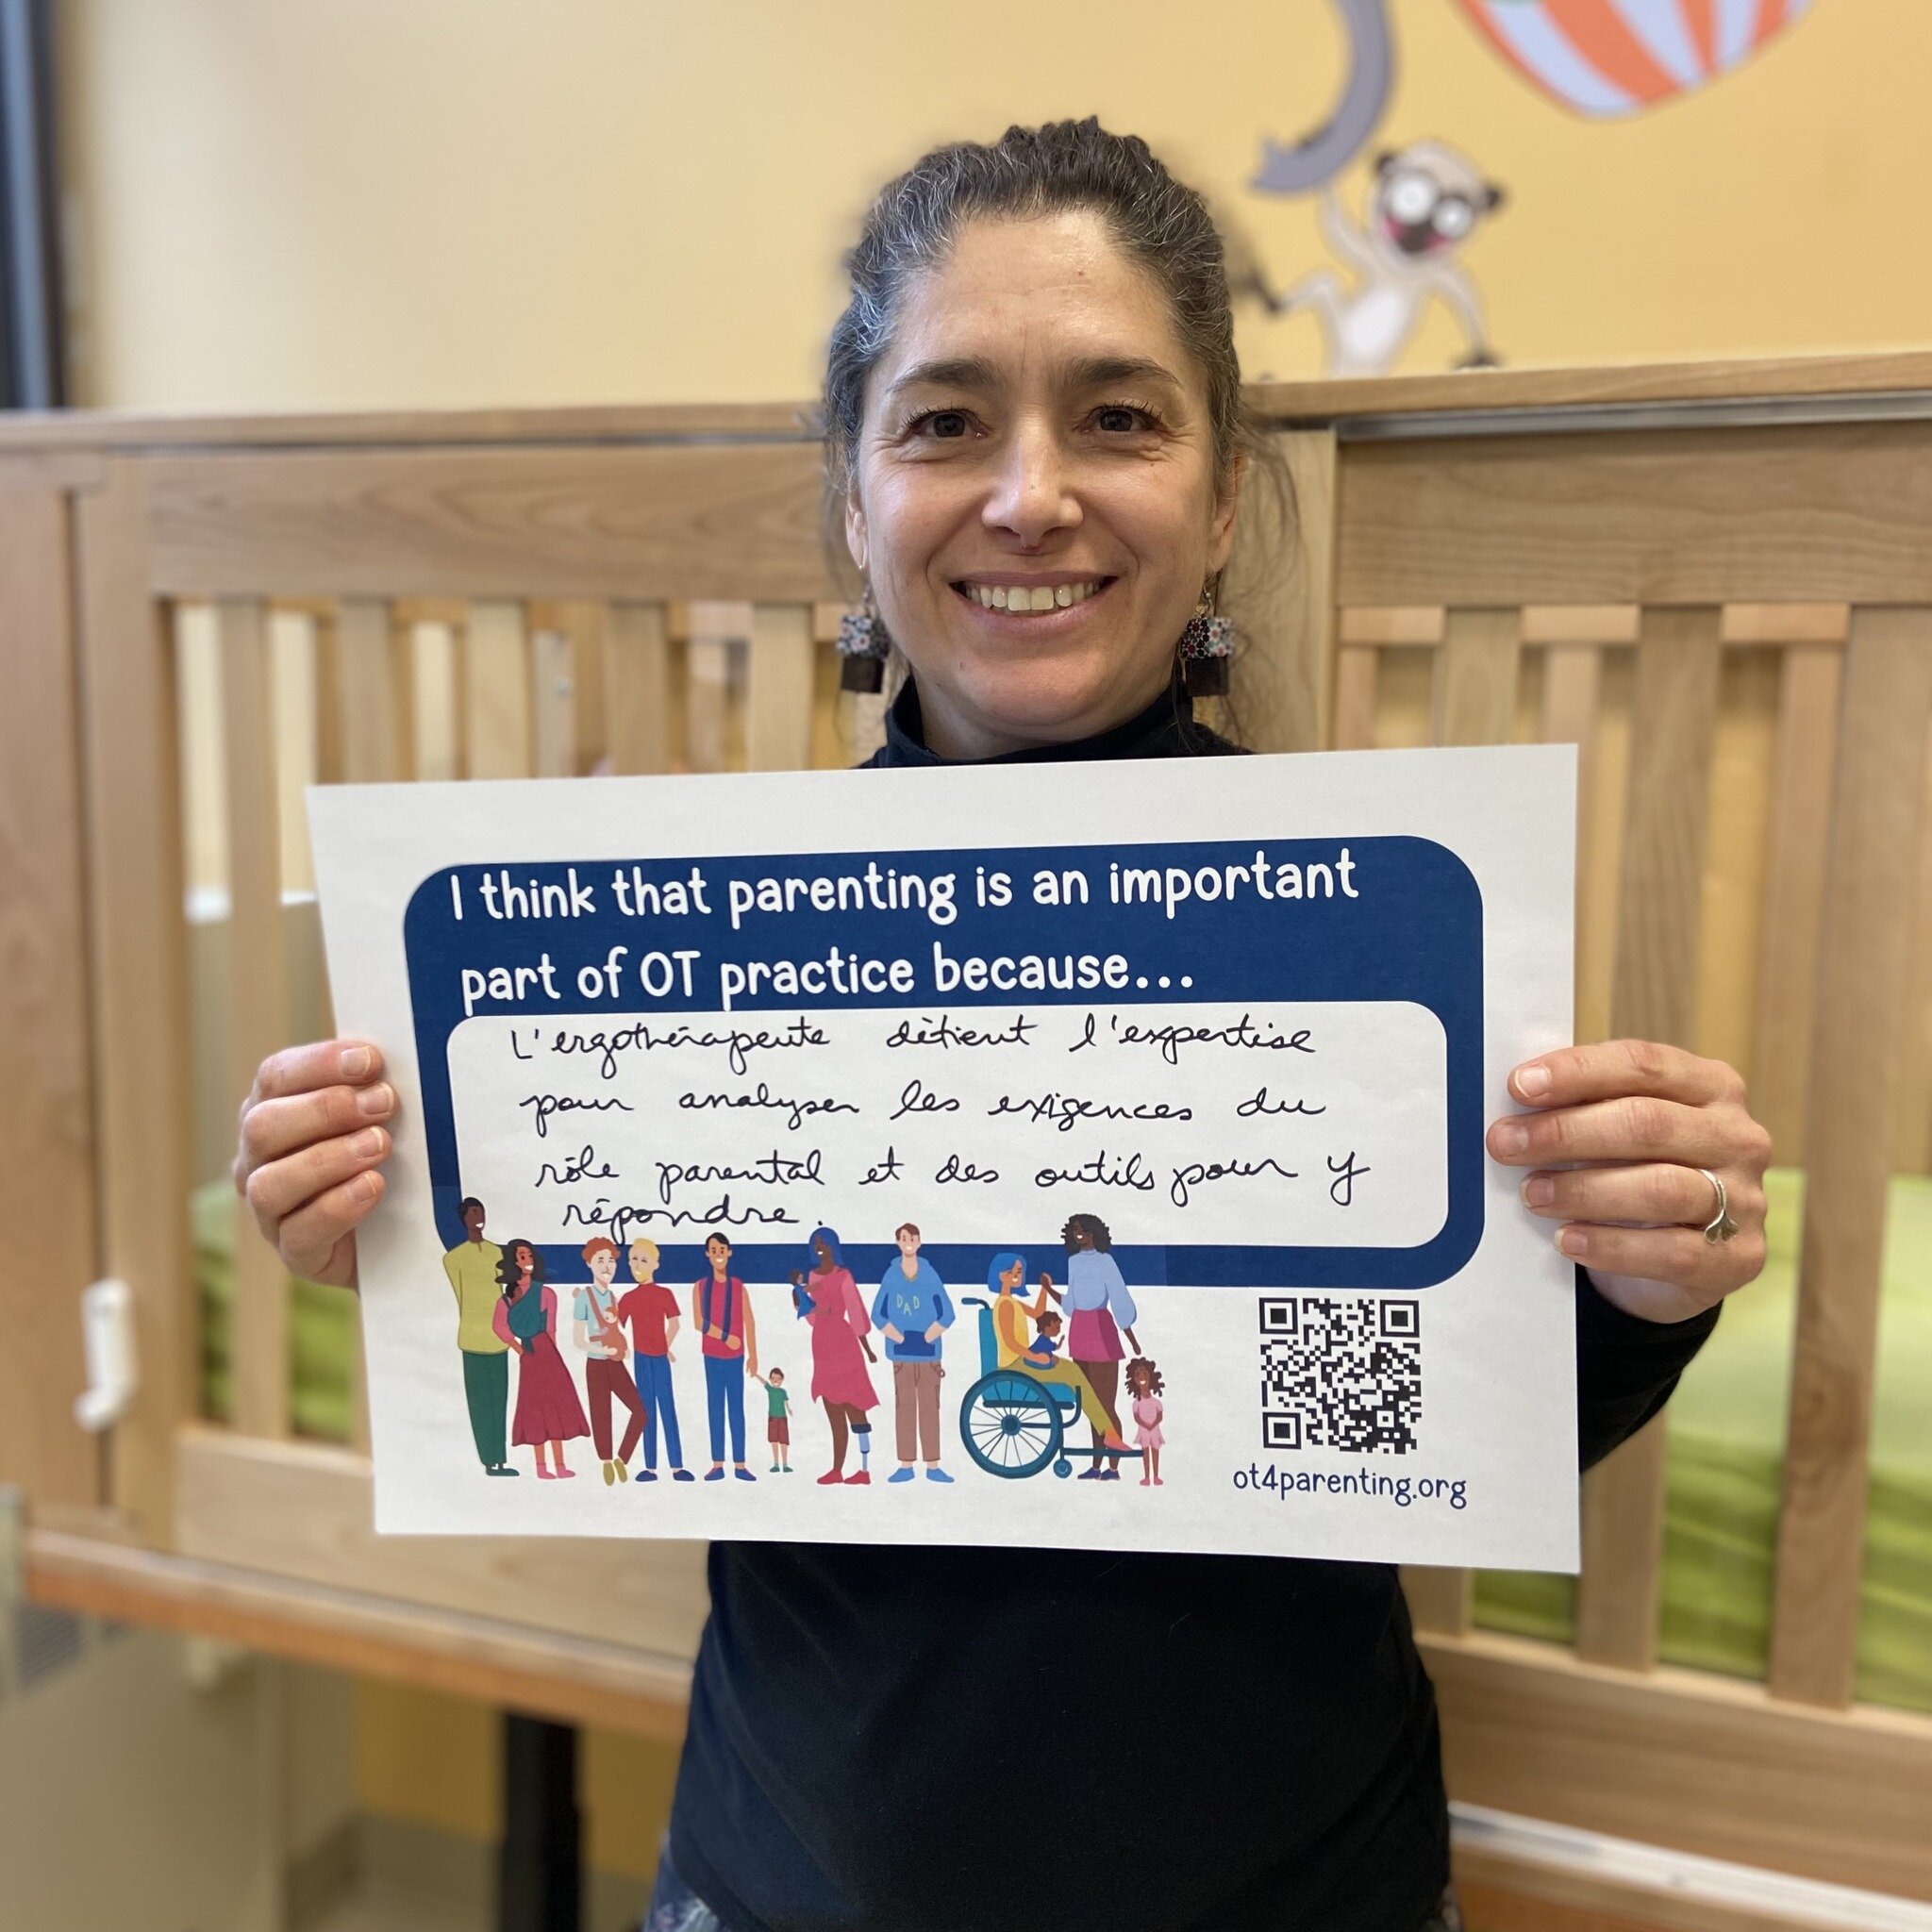 Cathy is an OT at the Parents Plus Clinic of the Centre de r&eacute;adaptation en d&eacute;ficience physique Lucie-Bruneau and she thinks that parenting is an important part of OT practice because... &quot;the occupational therapist has the expertise